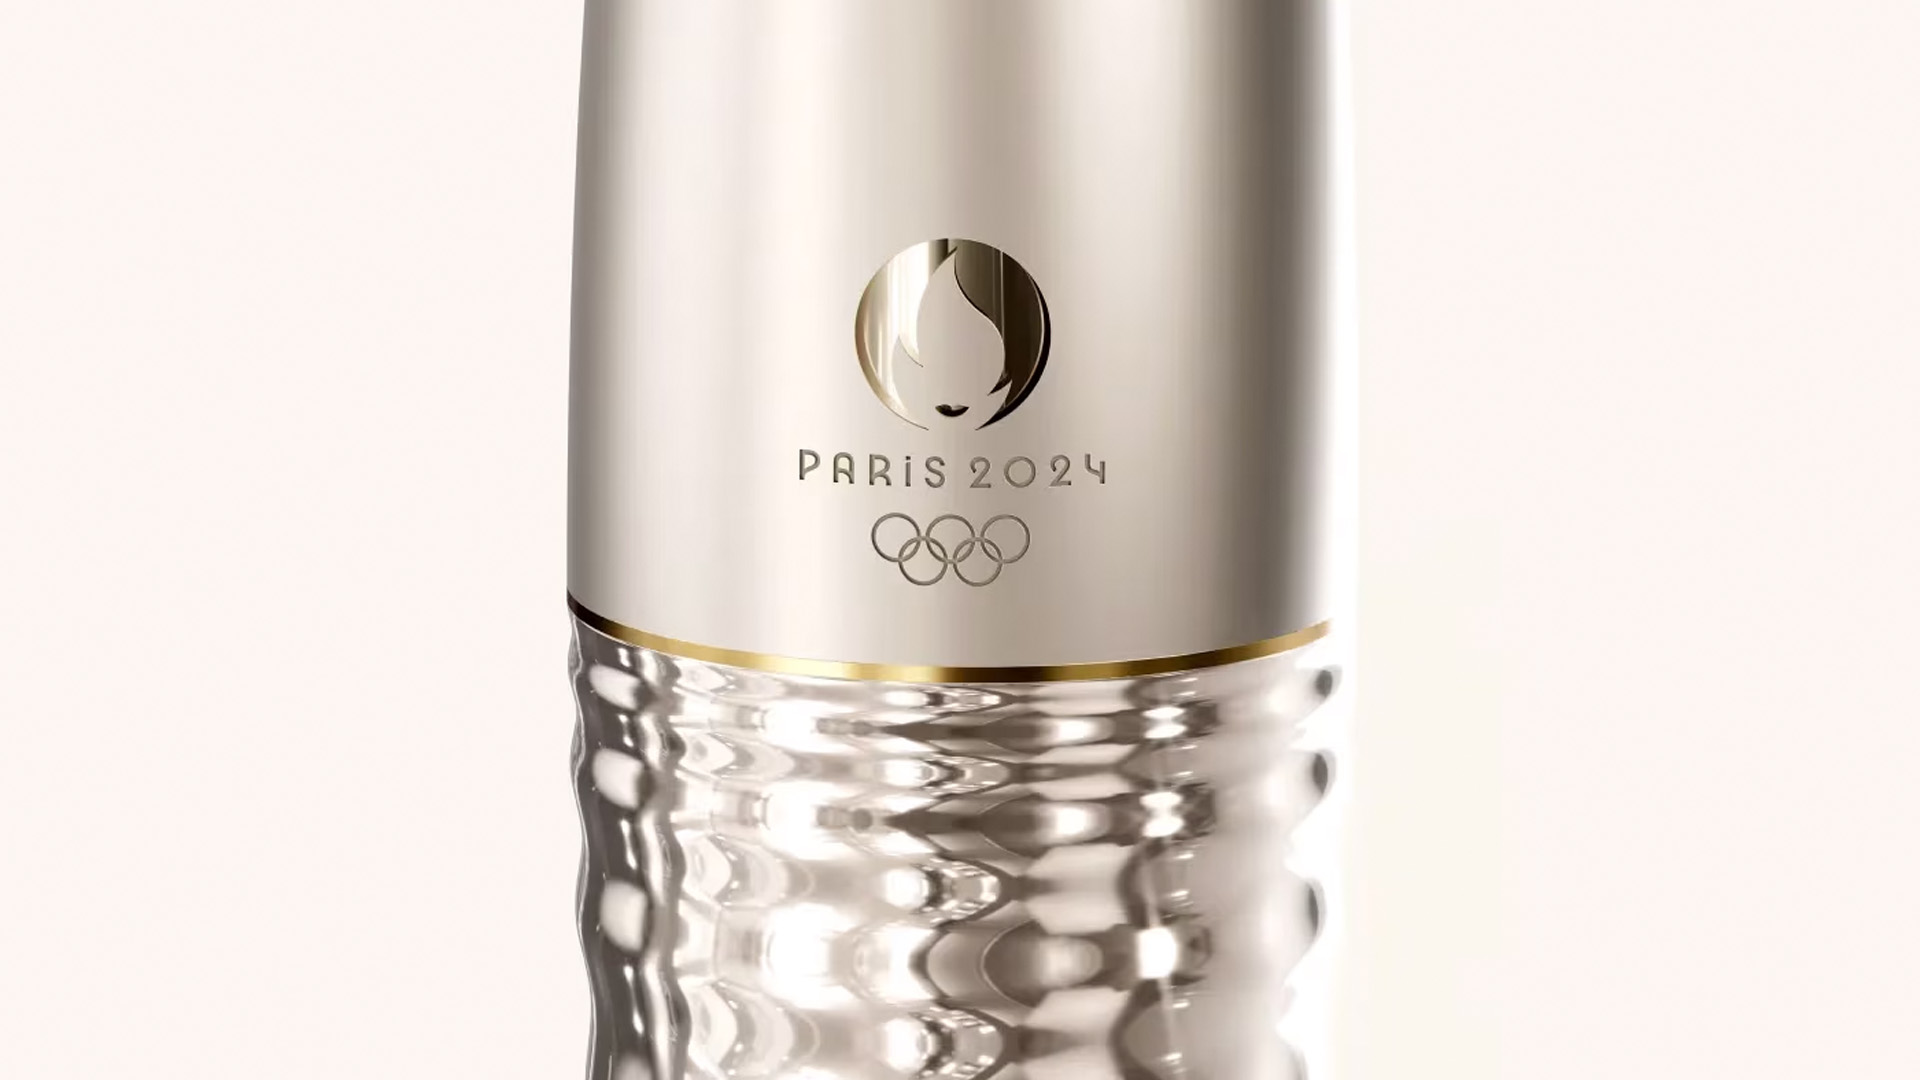 The curves of the Olympic torch reflect the themes of equality and peace /Paris 2024